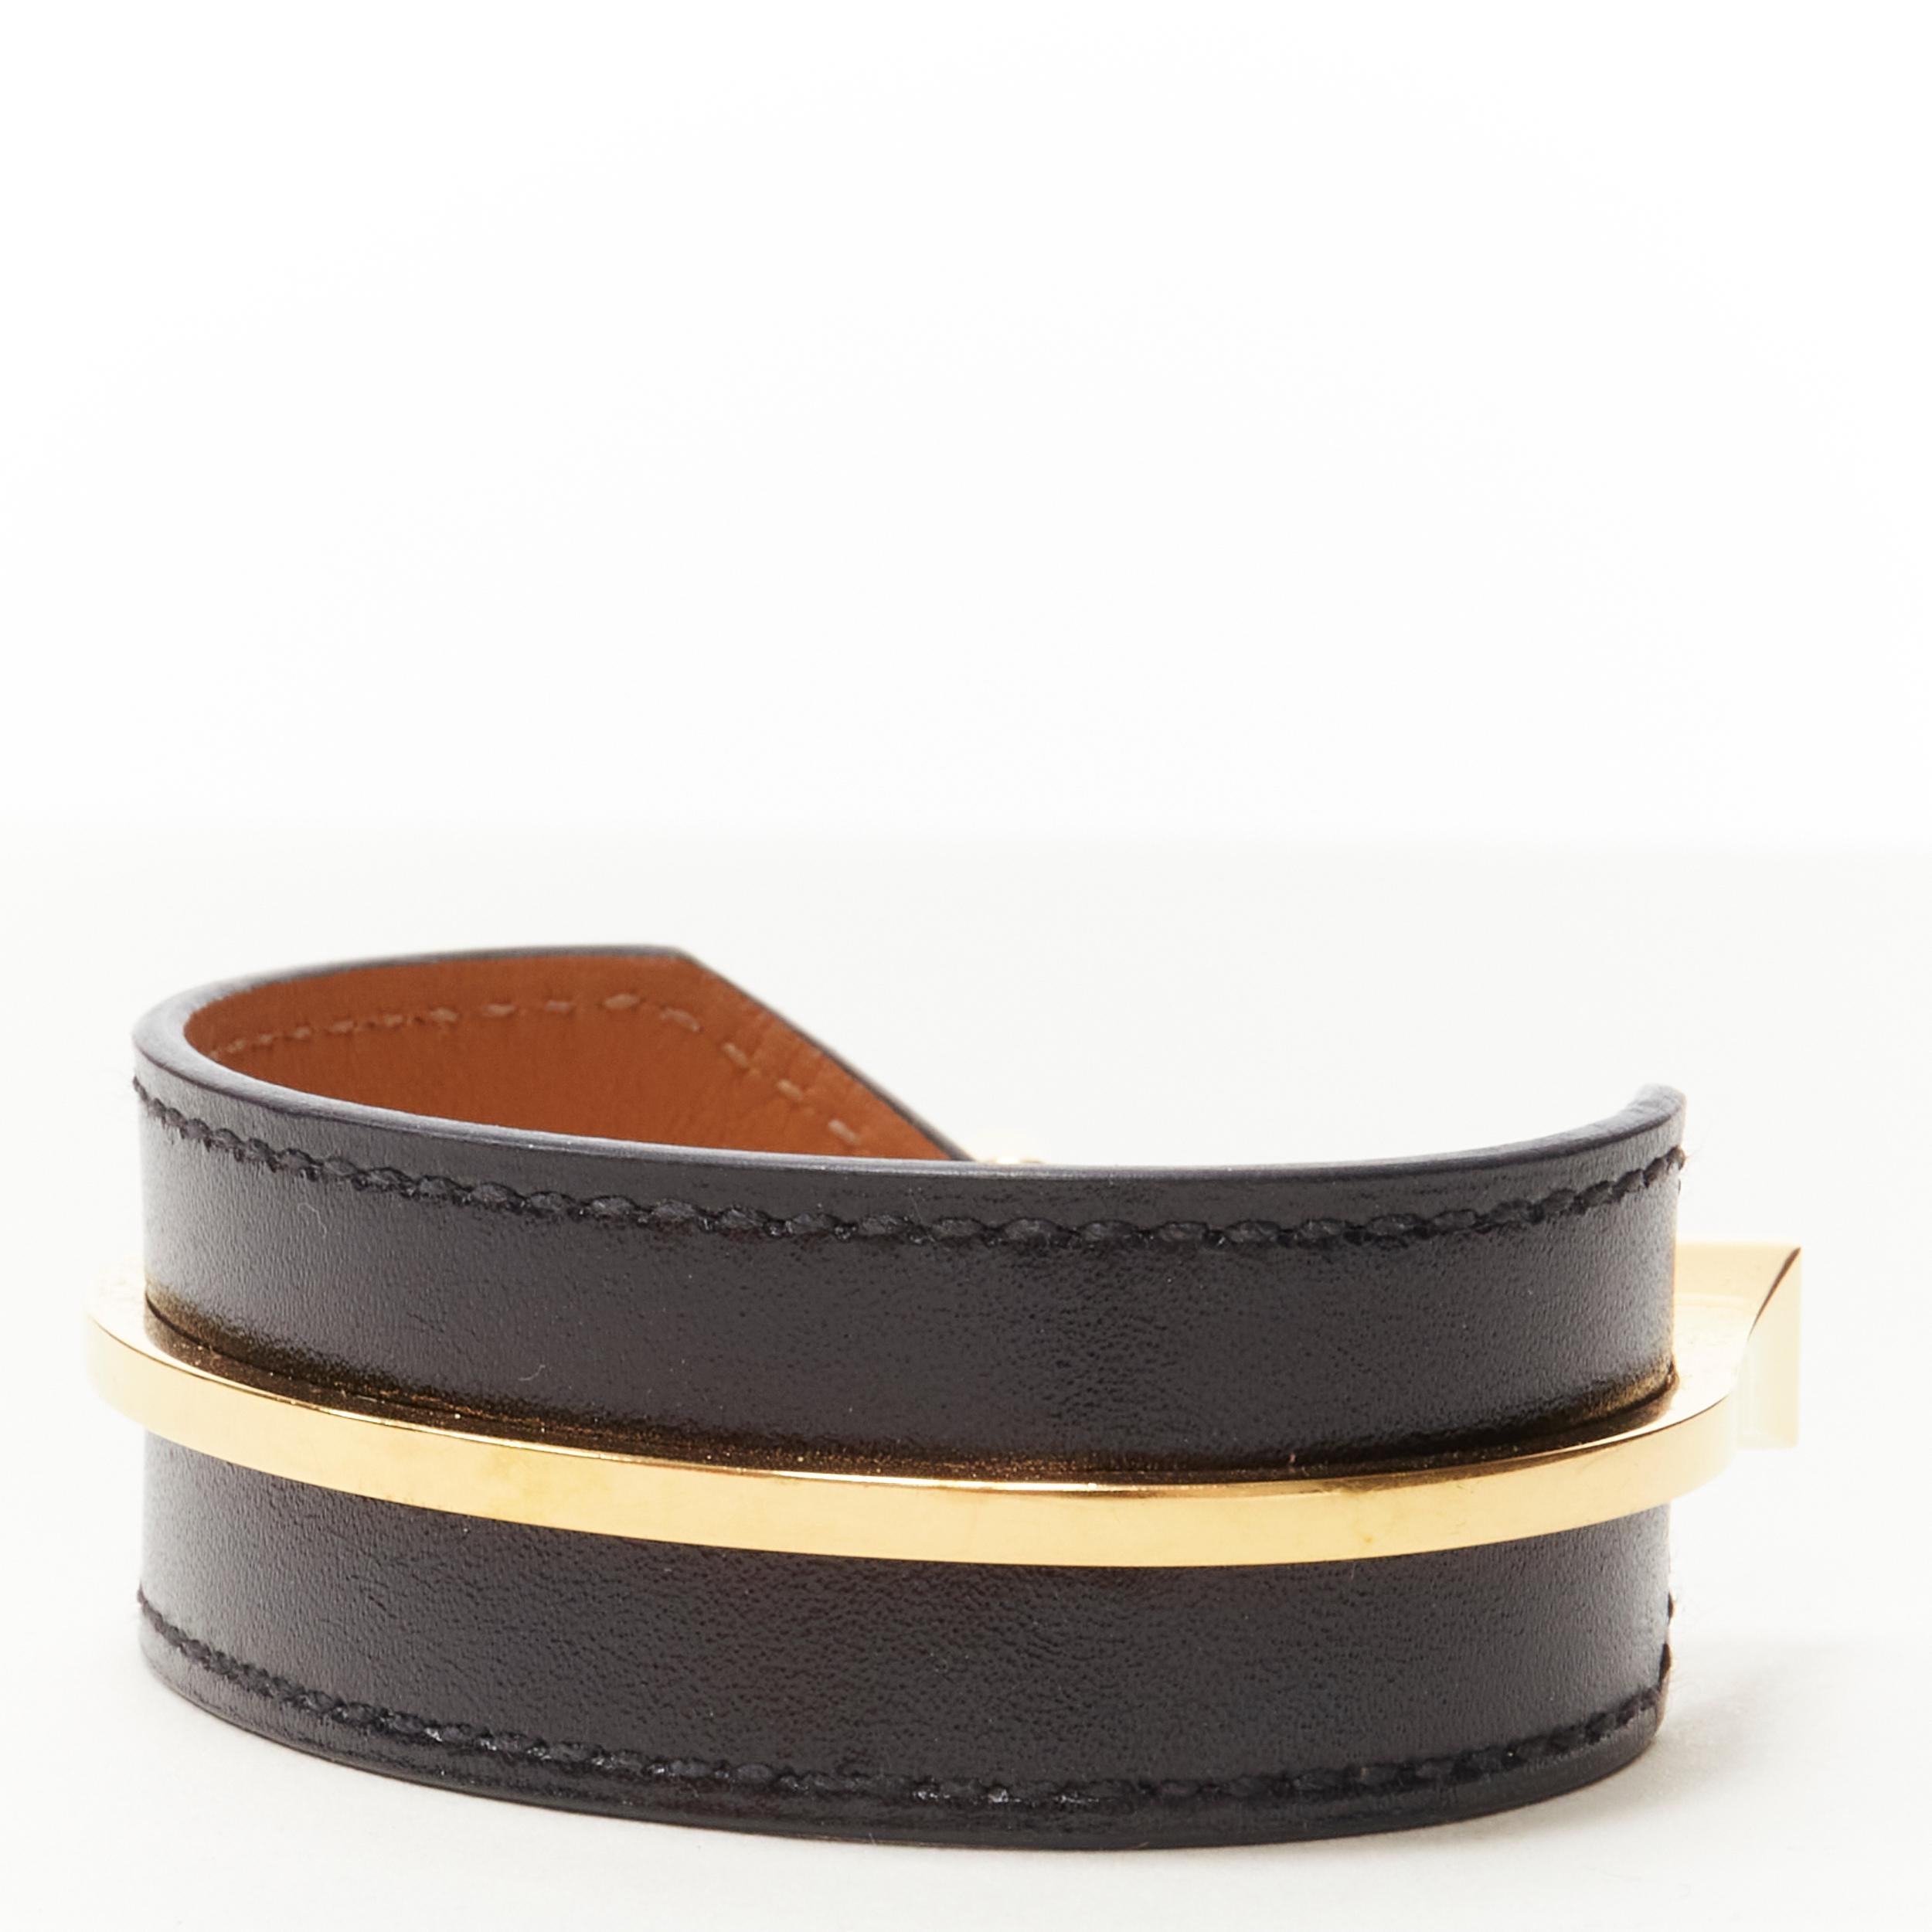 HERMES gold plated brass black leather open cuff minimal bracelet 
Reference: KEDG/A00010 
Brand: Hermes 
Material: Leather 
Color: Black 
Pattern: Solid 
Extra Detail: Minimal cuff. Wide black leather cuff with gold-plated brass cuff attached.